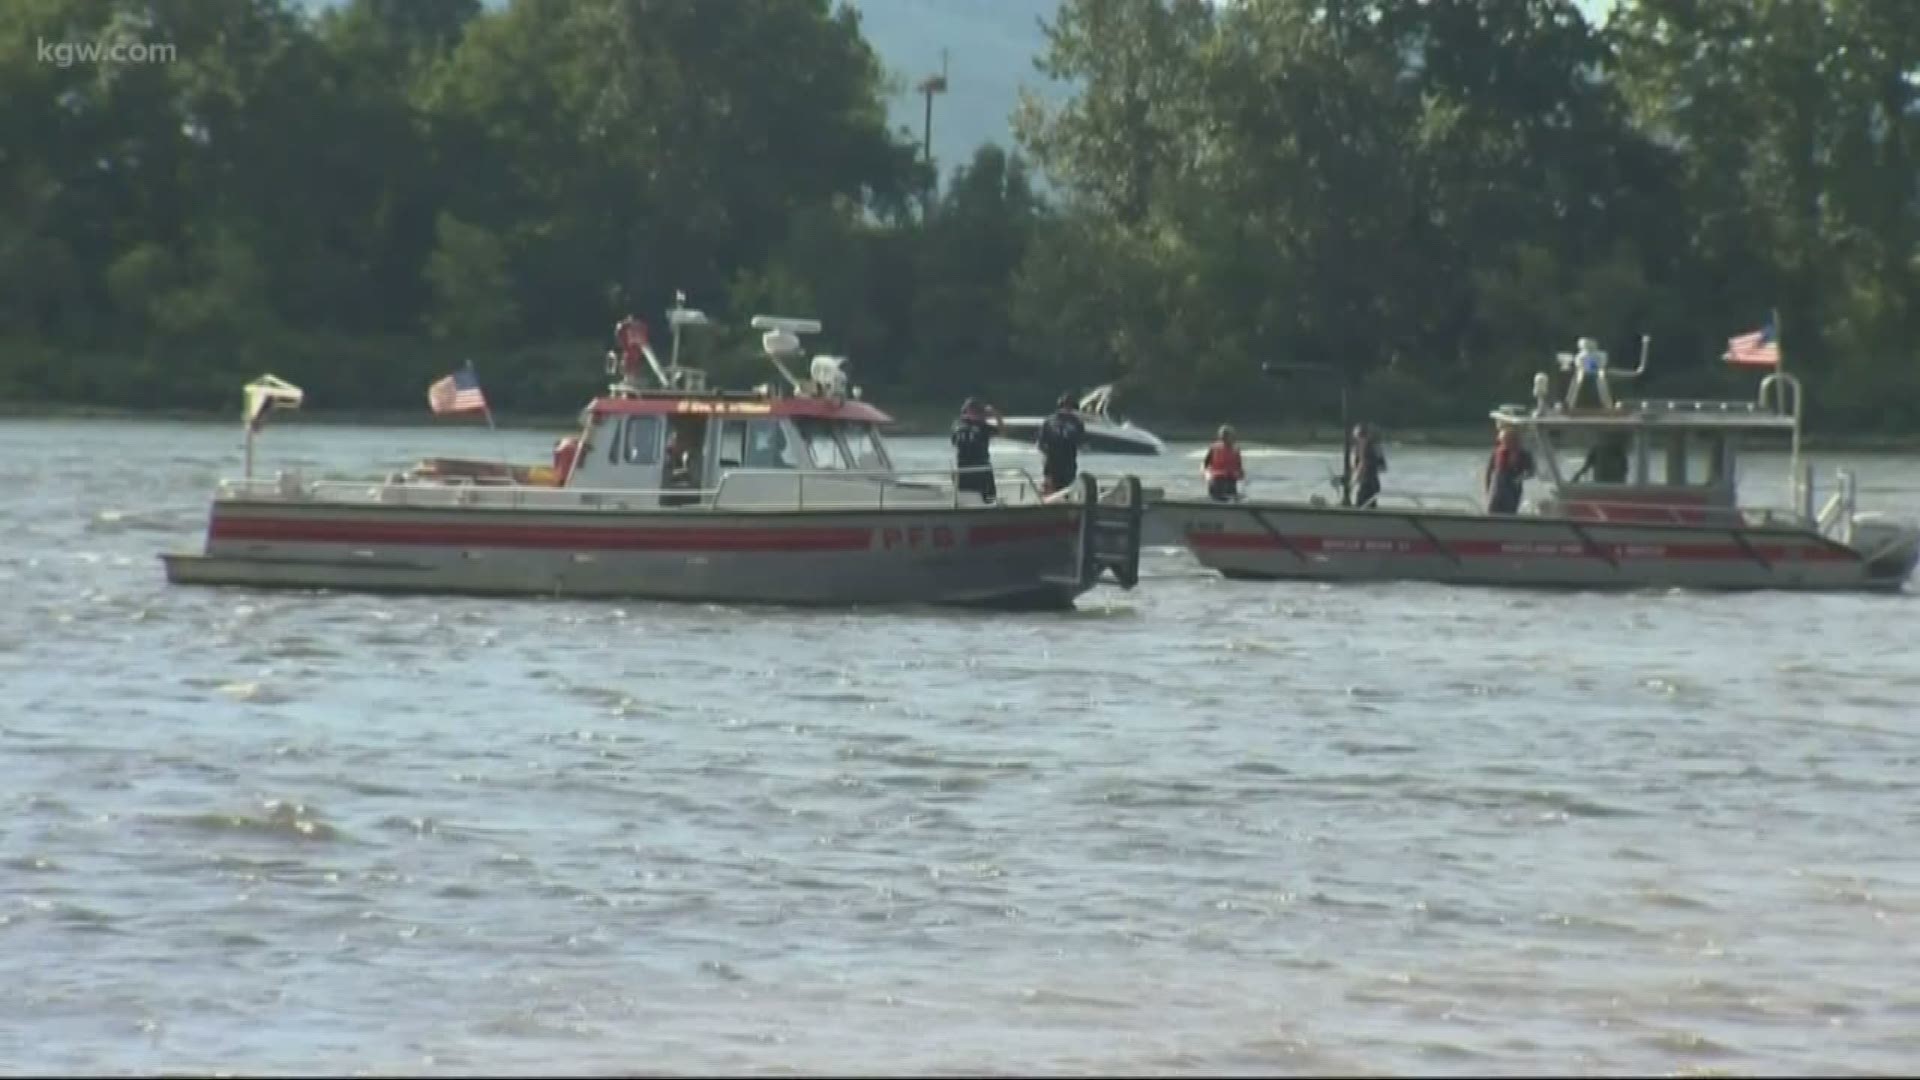 One person drowned and another person went missing in the Columbia River on Friday night.